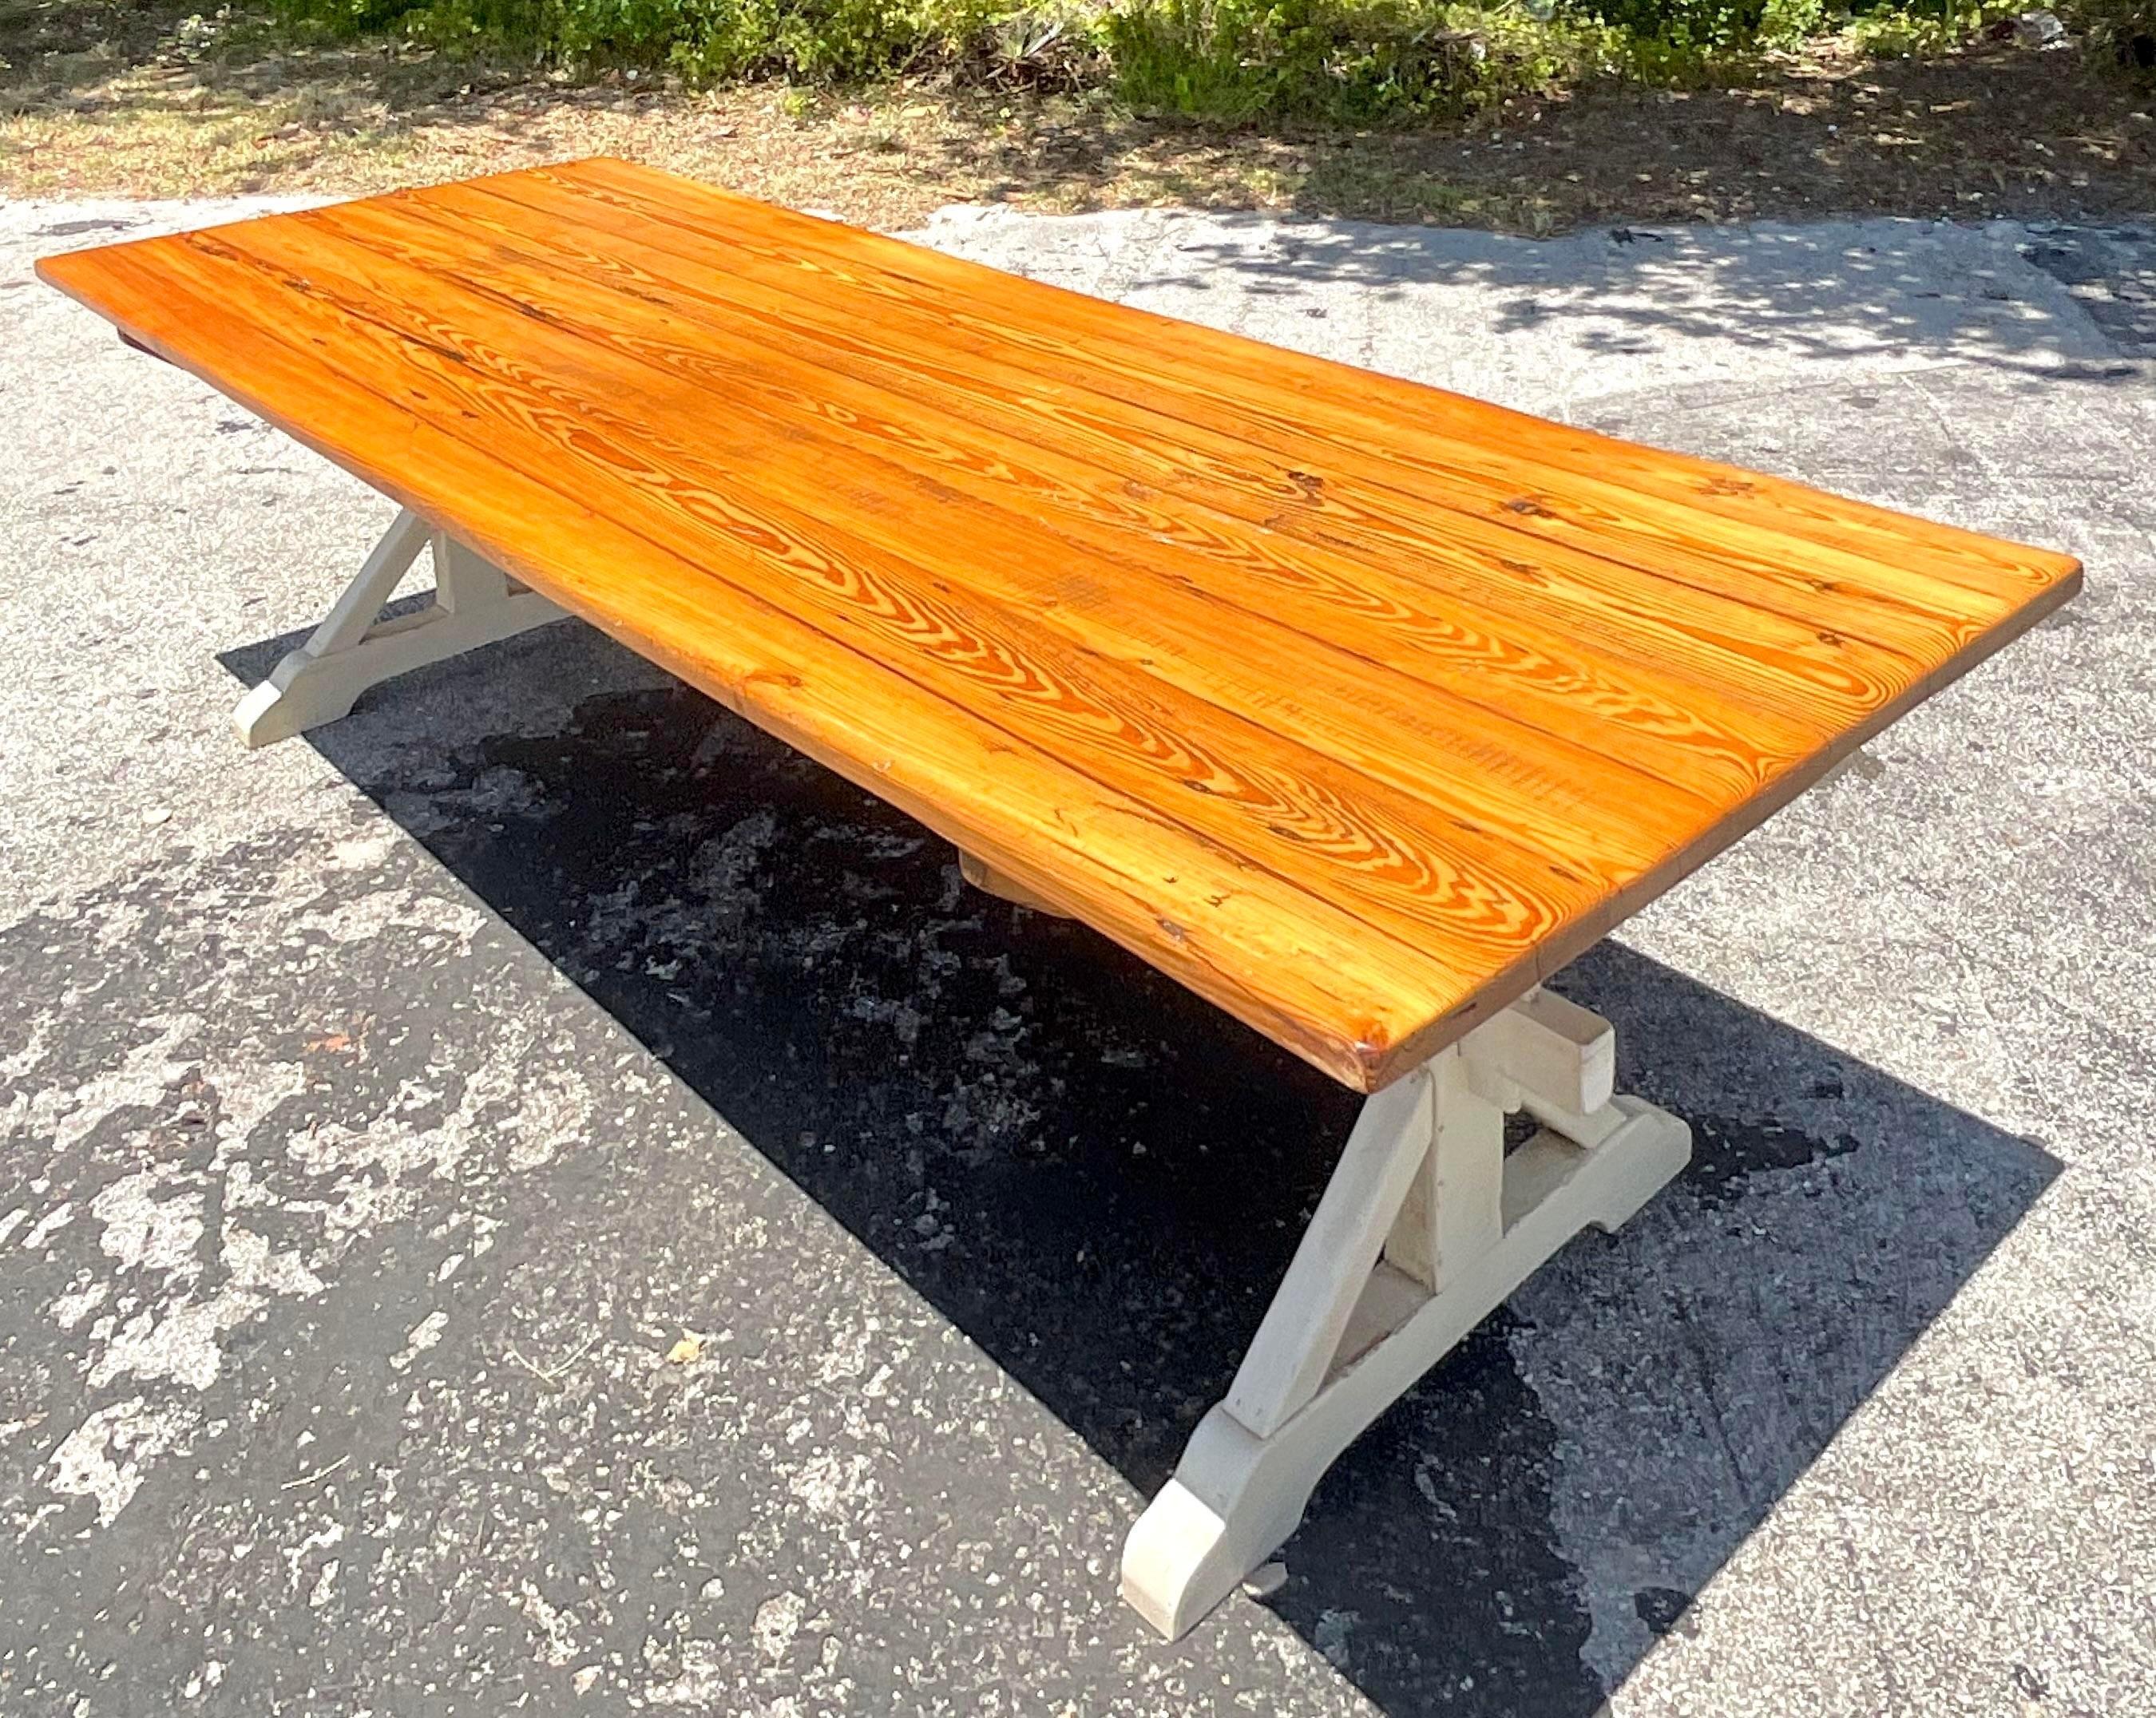 Experience the warmth of farmhouse hospitality with our Vintage Boho Trestle Plank Farm Table. Inspired by American craftsmanship and infused with Bohemian flair, this table offers both rustic charm and versatile functionality, perfect for gathering